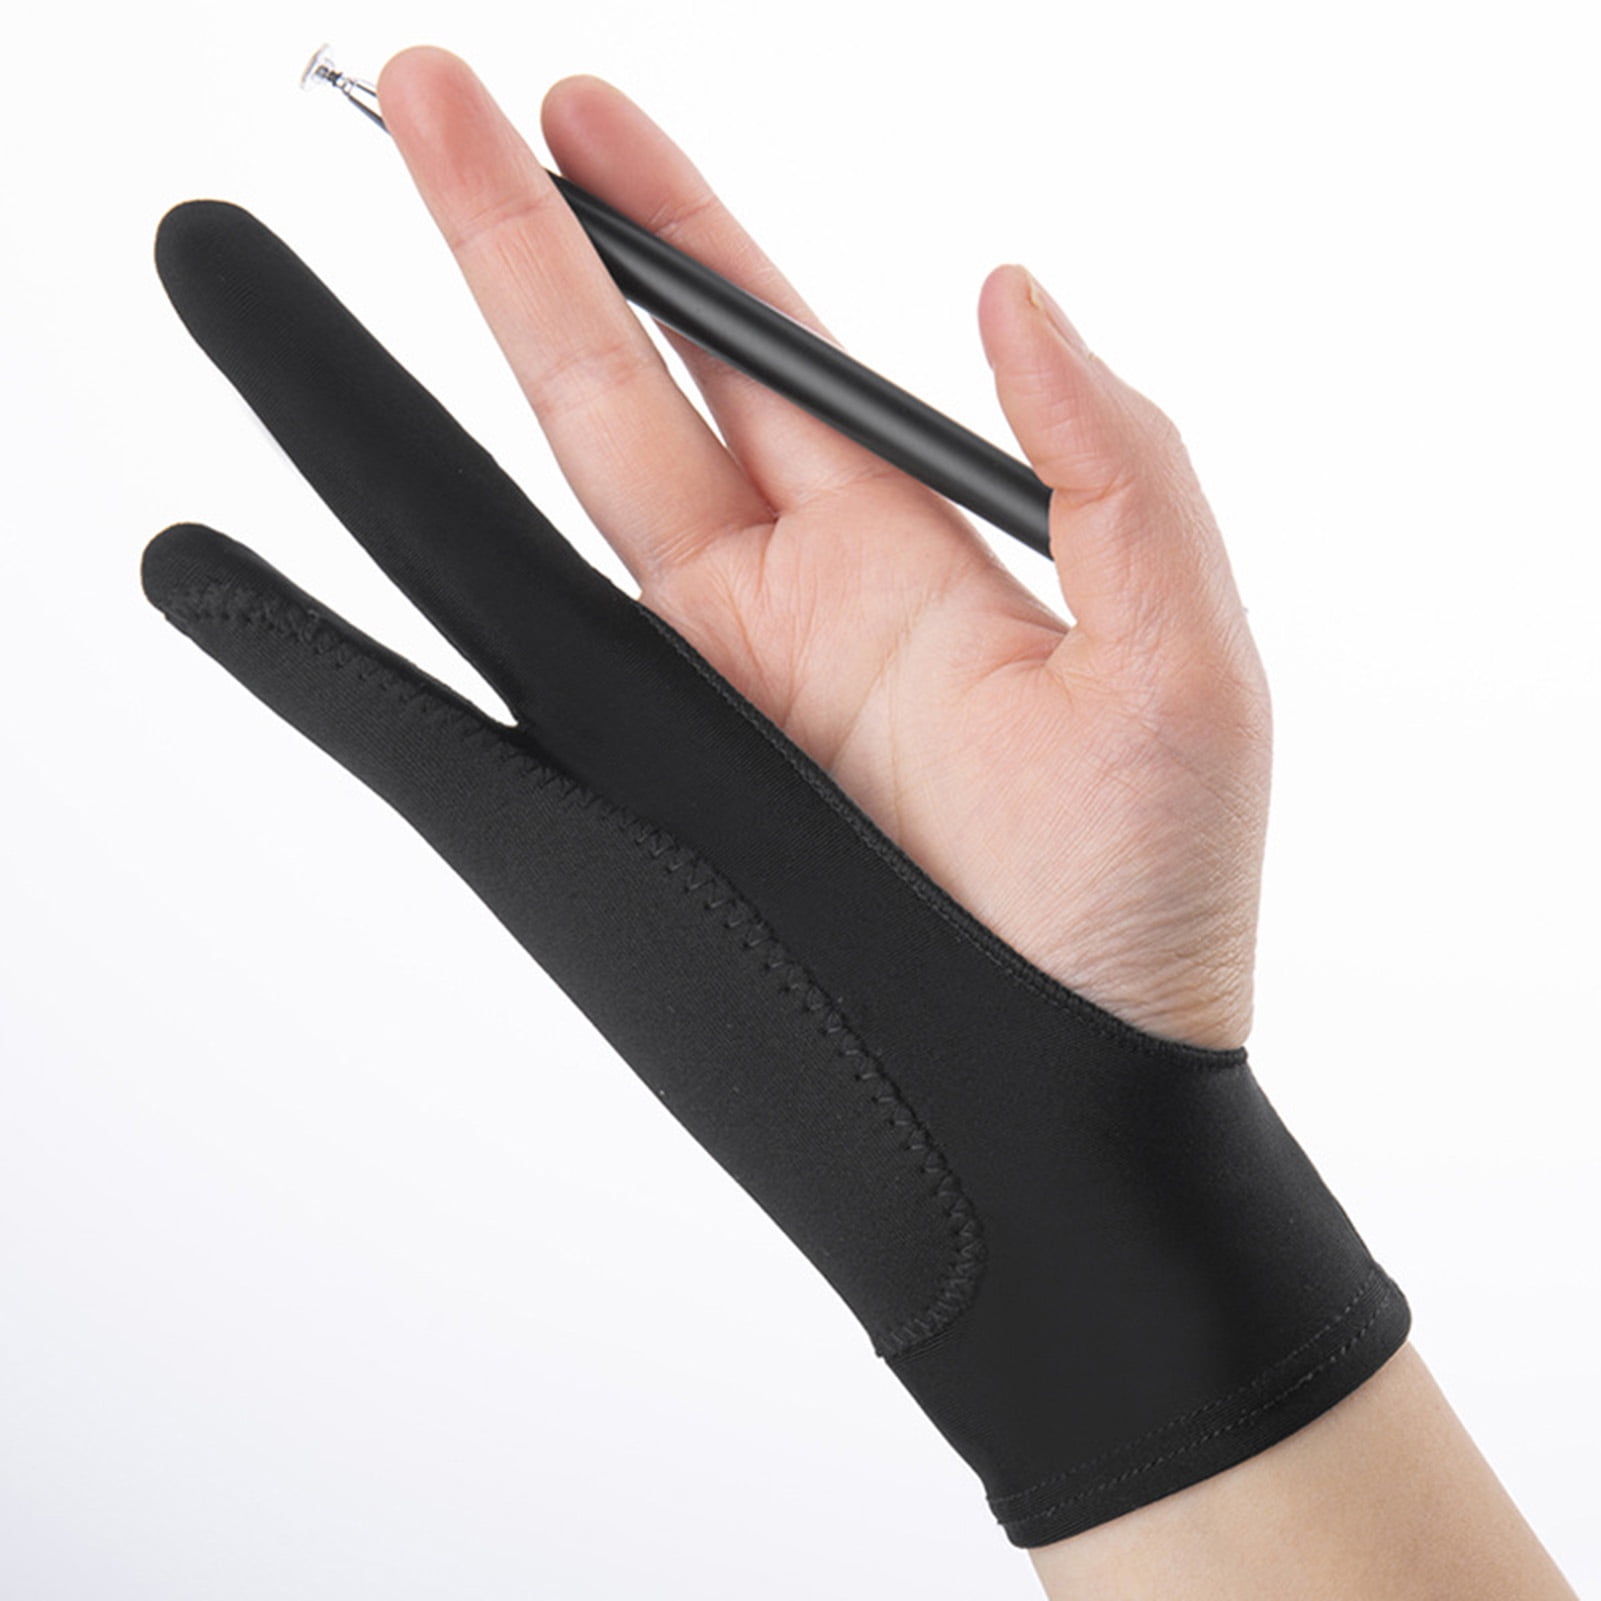 Veejoda Artist-Glove for Drawing Tablet, Two-Finger Digital Drawing Glove,  Good for Right and Left Hand 6 Pack(Medium)